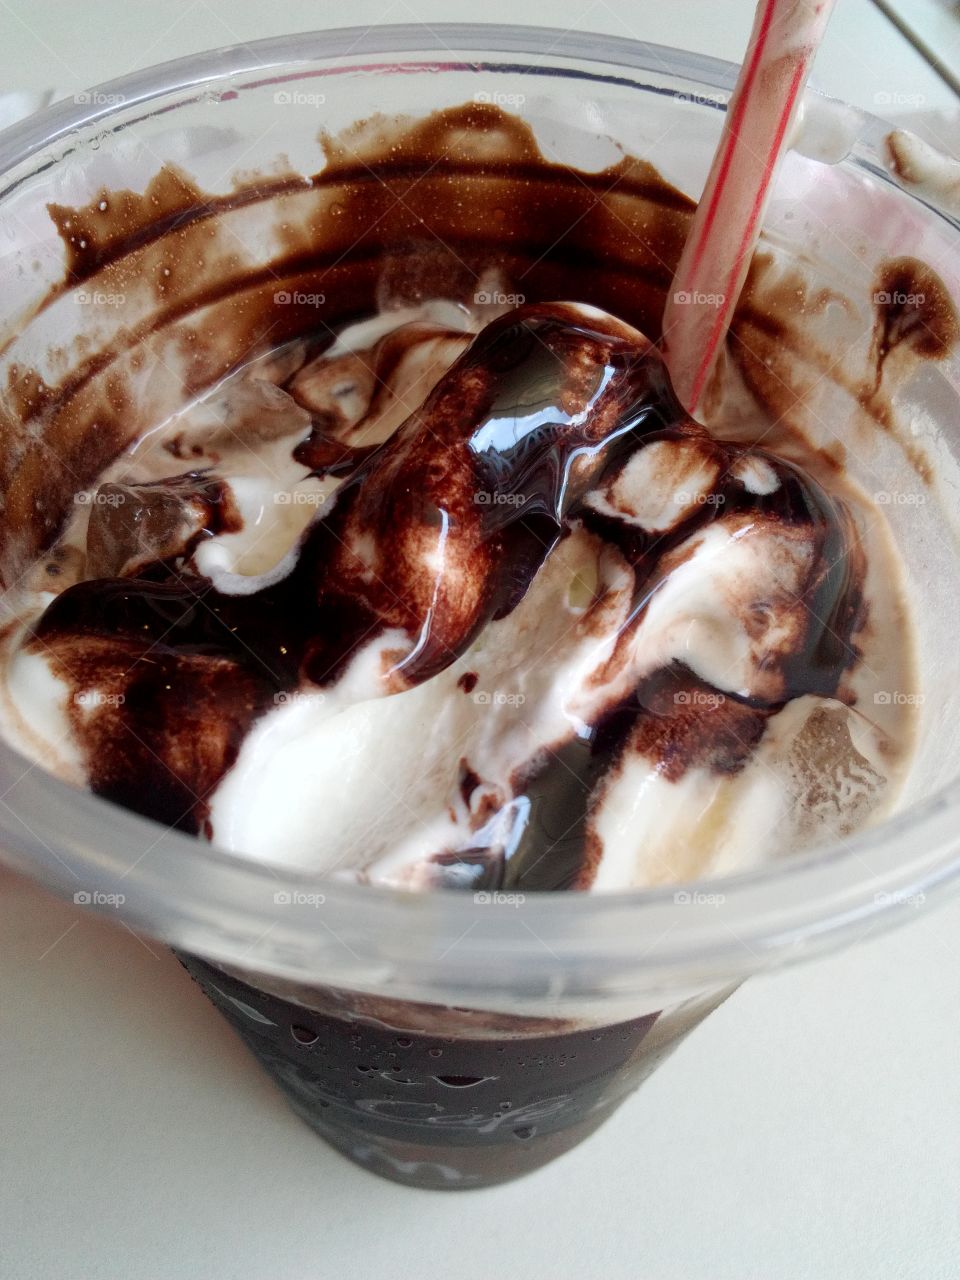 This is my Favorite Coke Float from McDonald's! I love this and it's perfect! This photo is really awesome too.